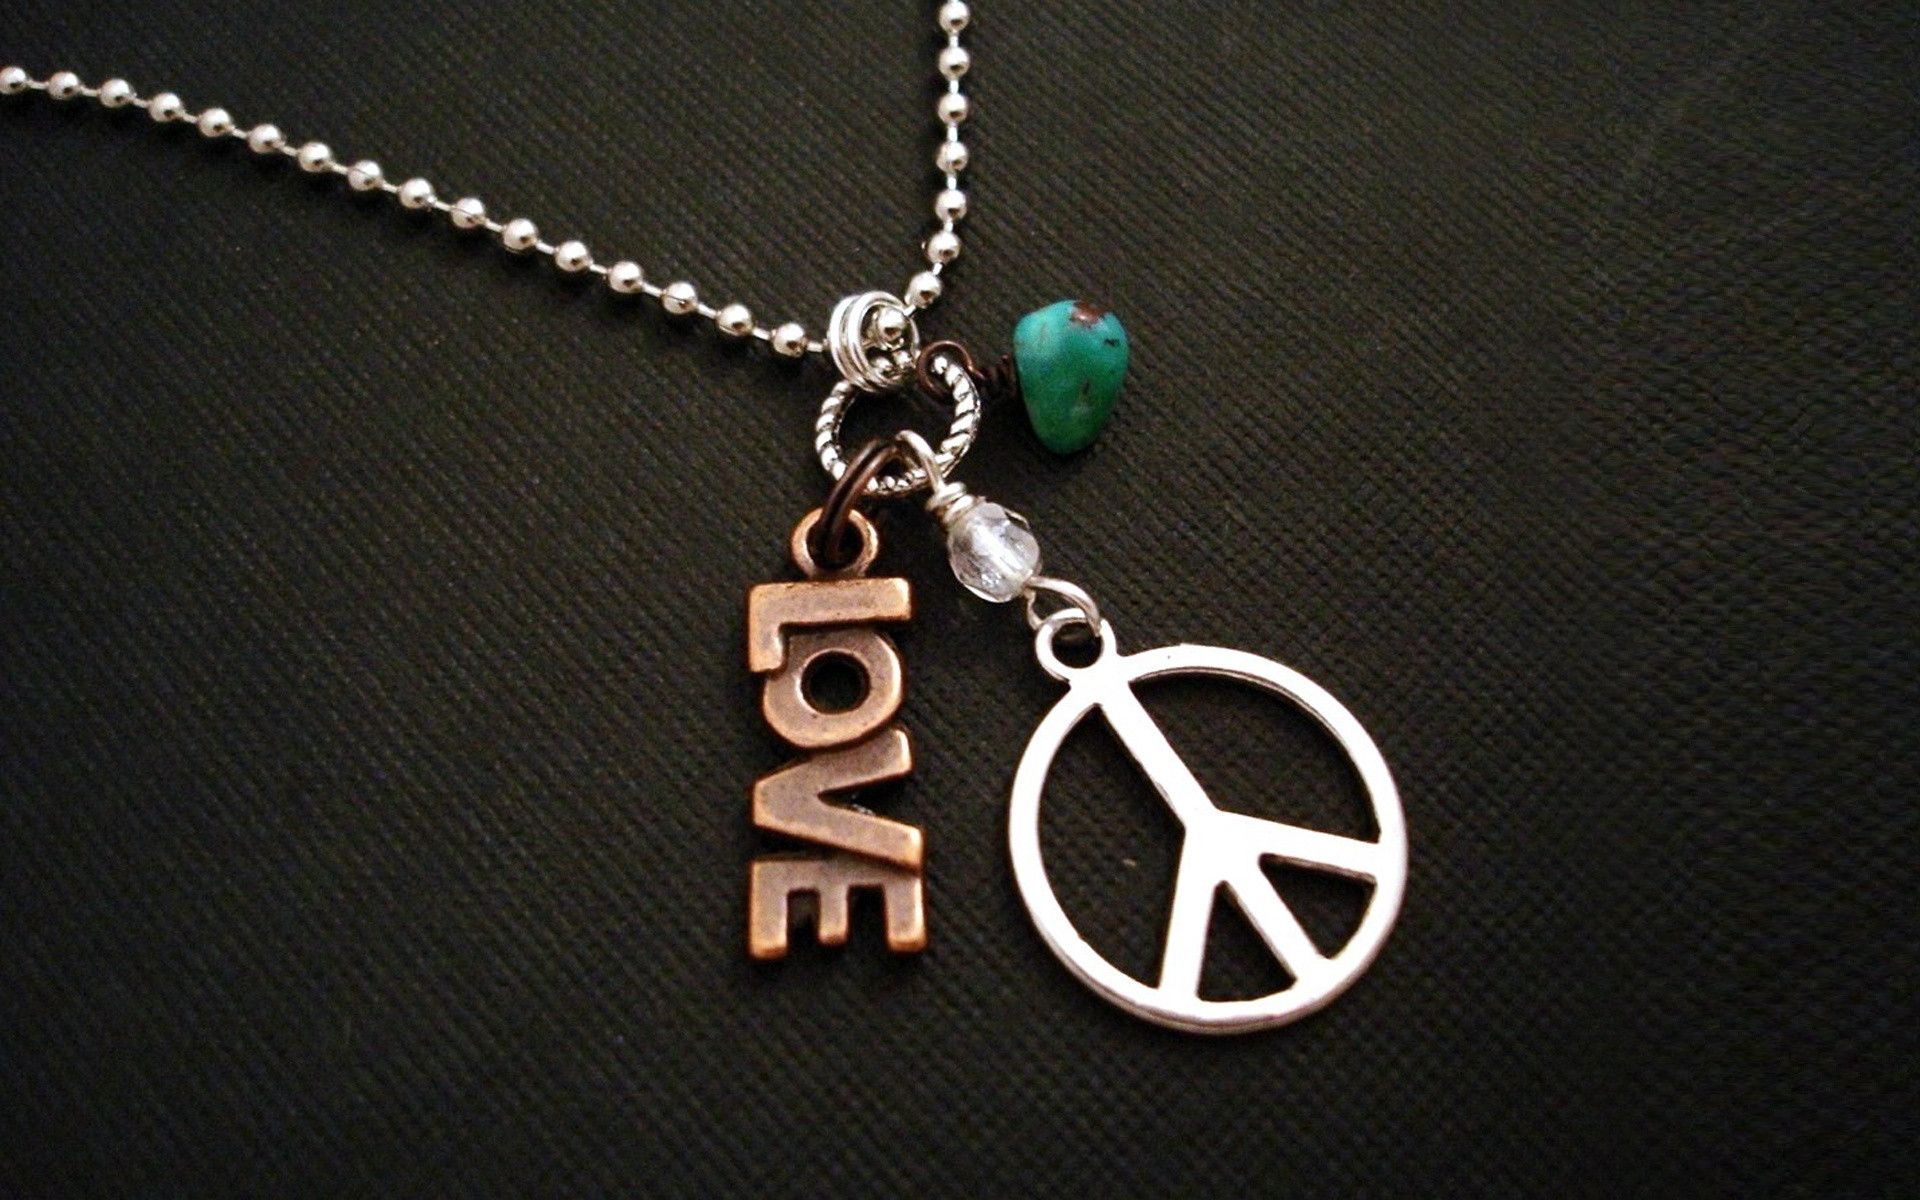 Peace And Love Backgrounds - Wallpaper Cave